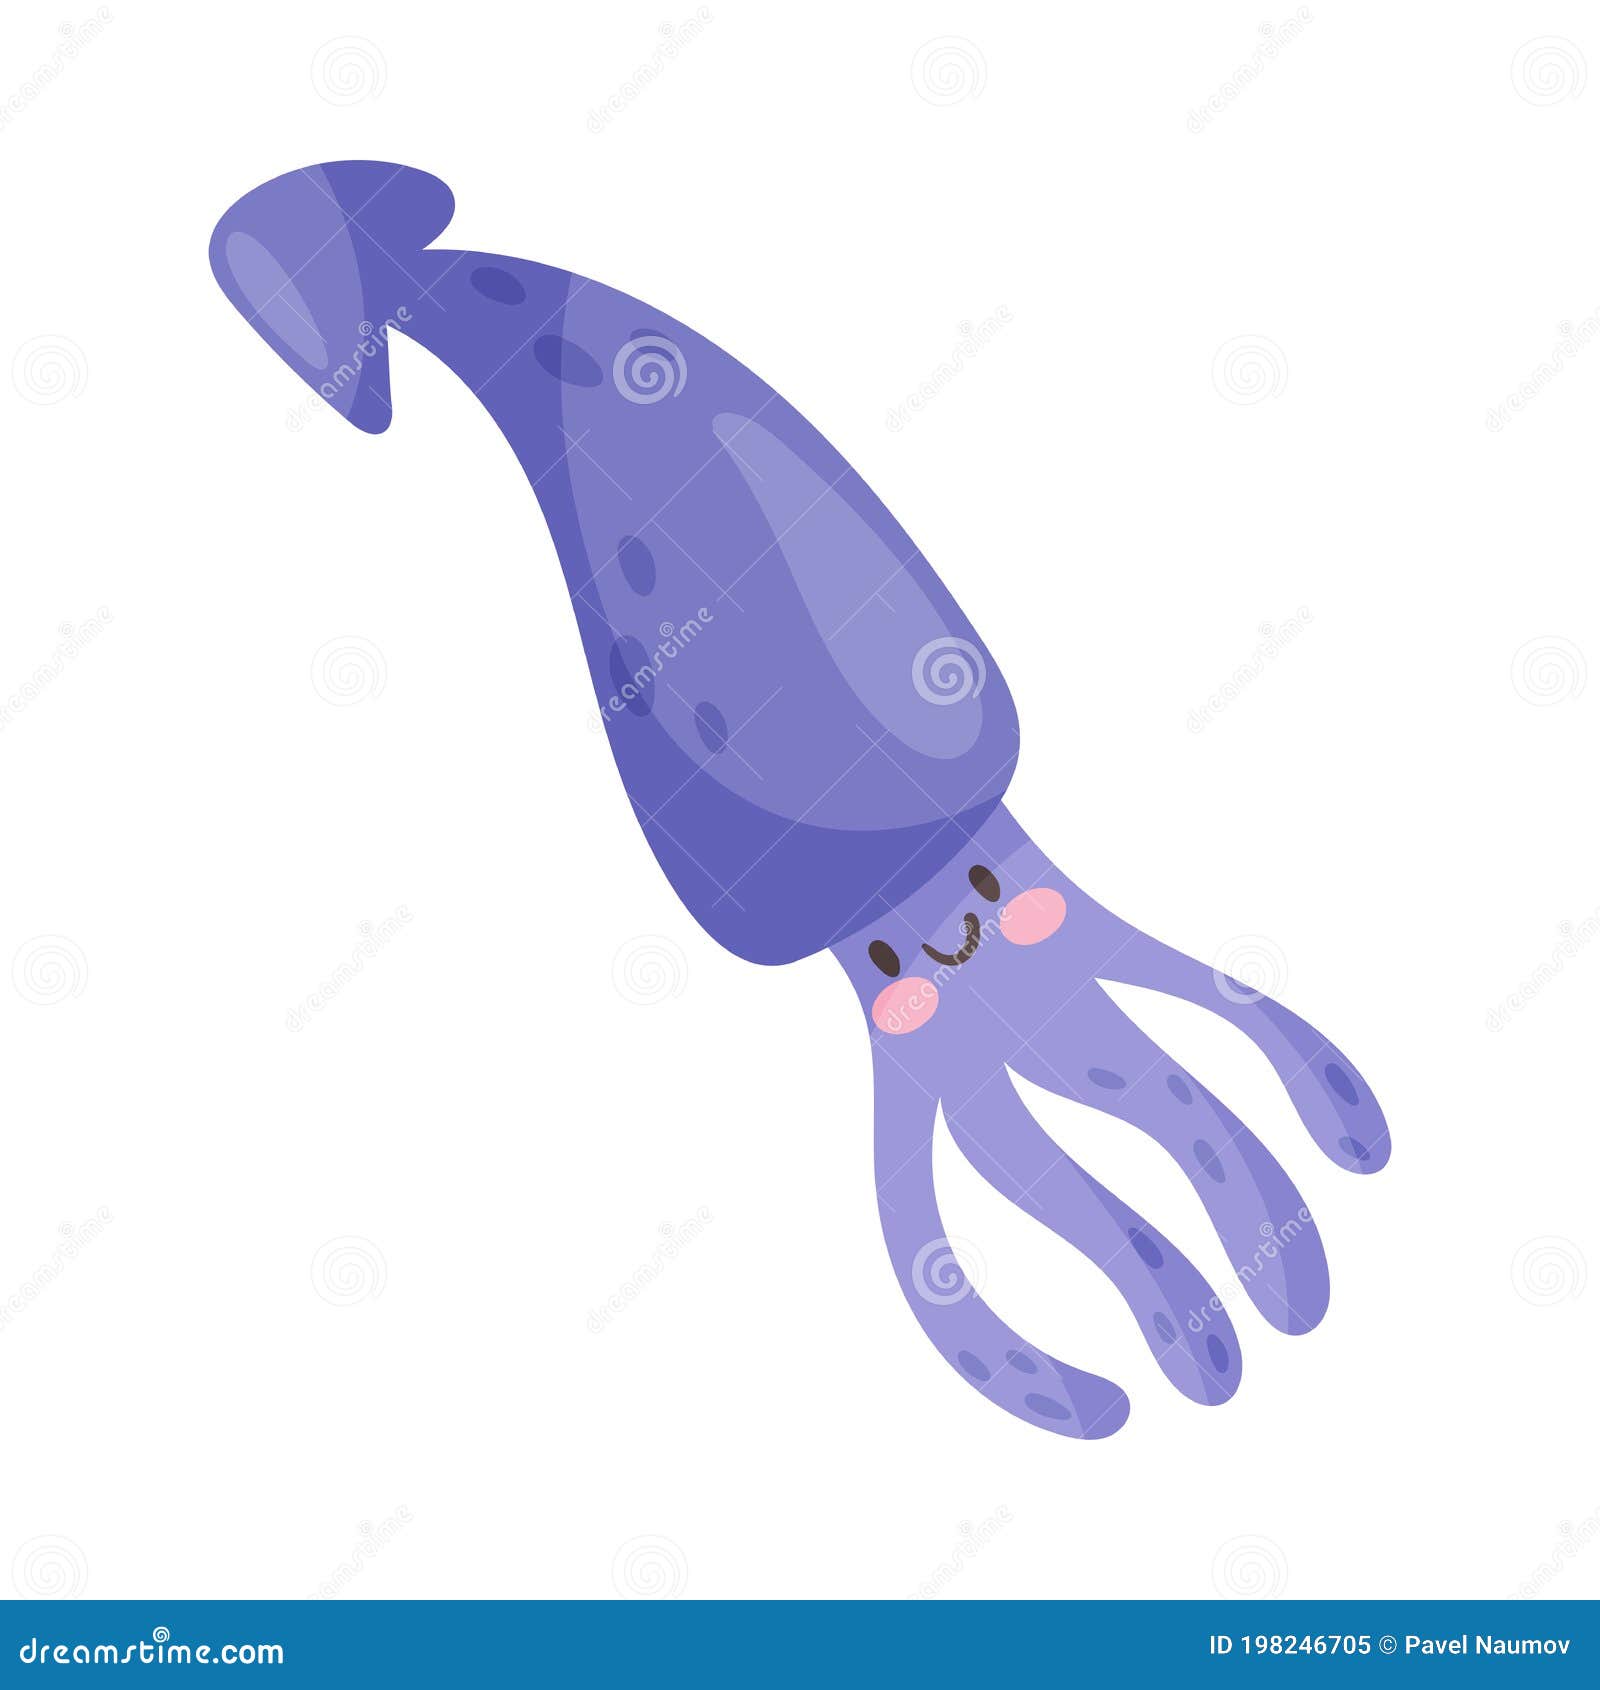 Funny Squid with Tentacles As Sea Animal Floating Underwater Vector  Illustration Stock Vector - Illustration of fauna, floating: 198246705